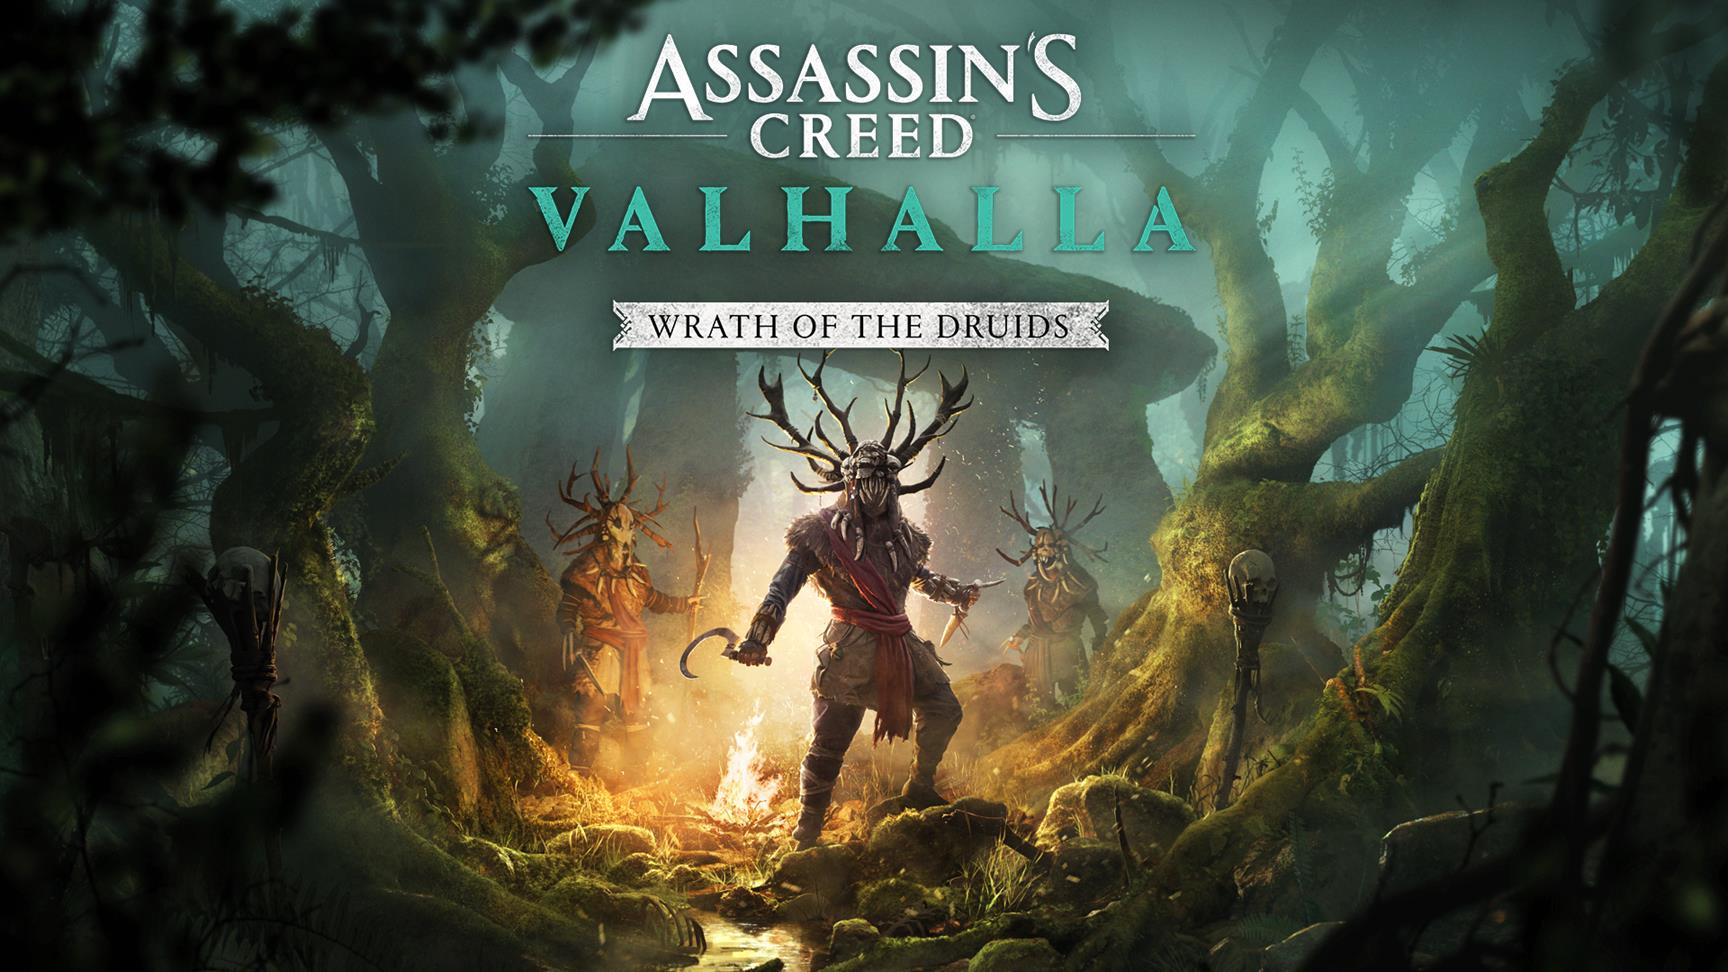 Image for Assassin's Creed Valhalla post-launch content revealed: seasons, story DLC, new skills and more